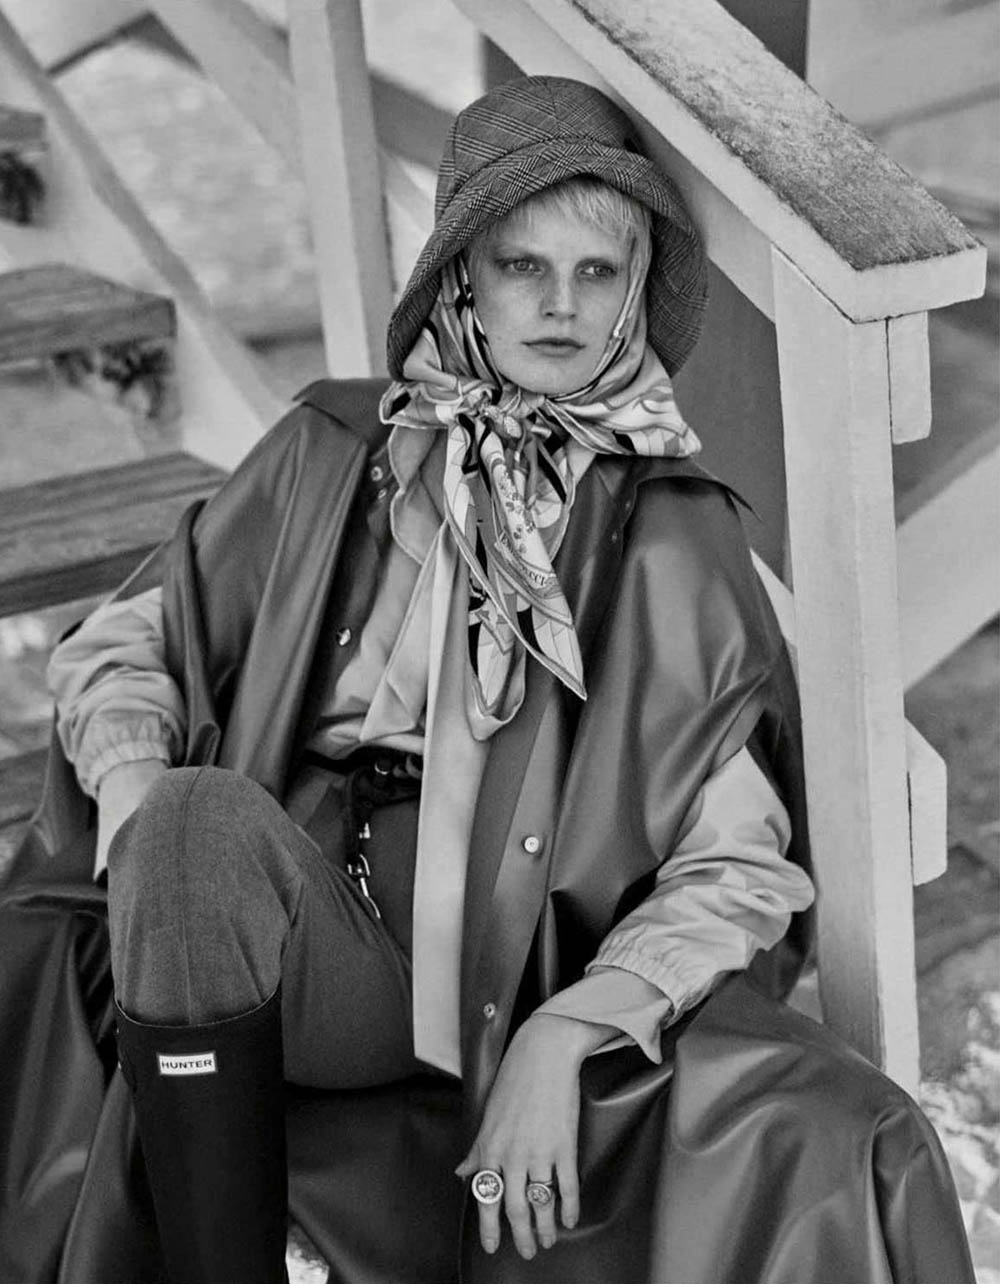 Hanne Gaby Odiele by Giampaolo Sgura for Vogue Germany September 2018